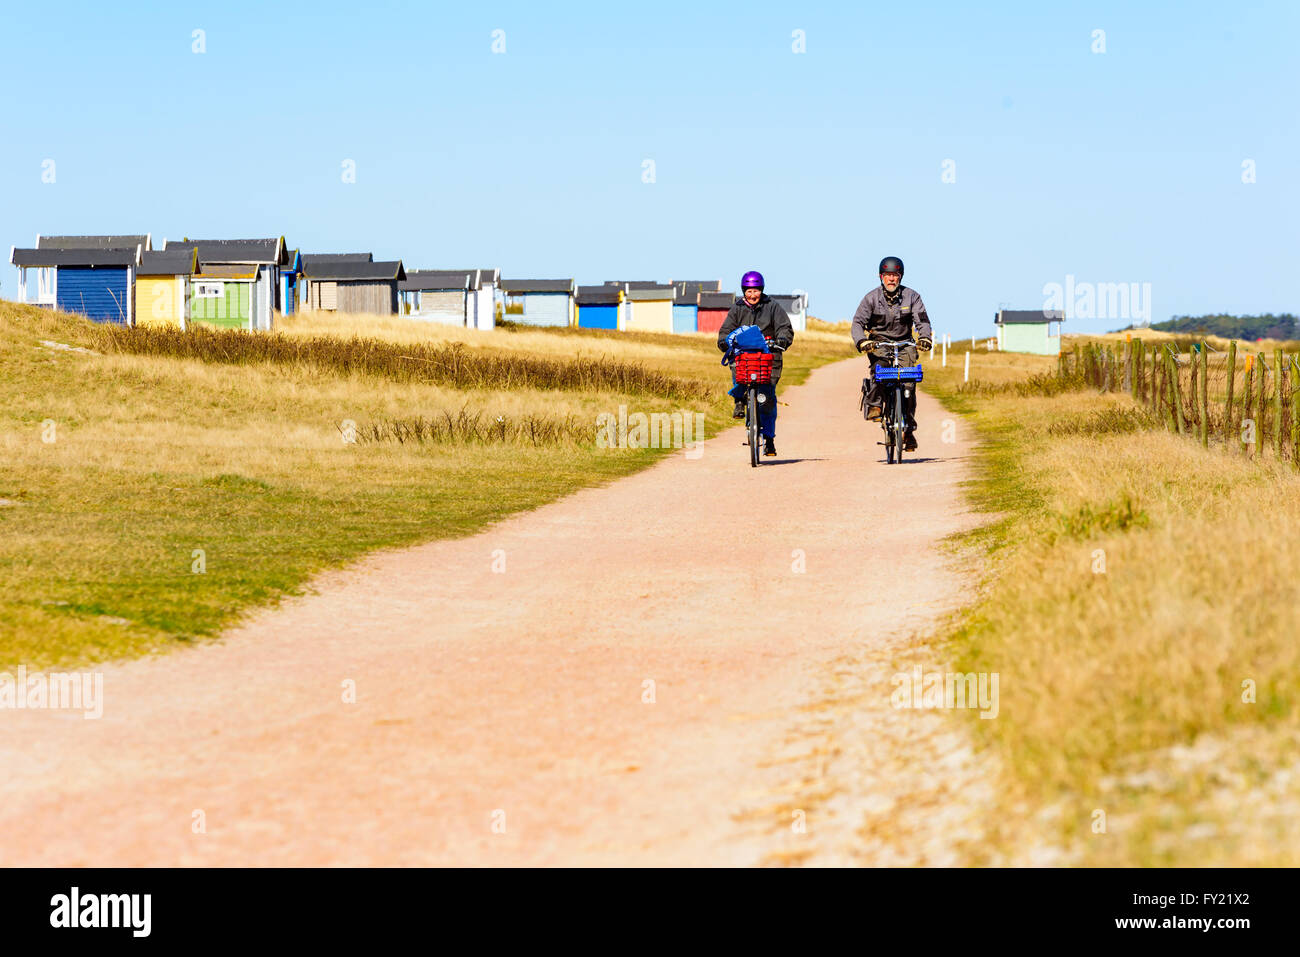 Skanor, Sweden - April 11, 2016: A senior couple is out riding bikes on the road at the beach along some bathing cabins. Both we Stock Photo